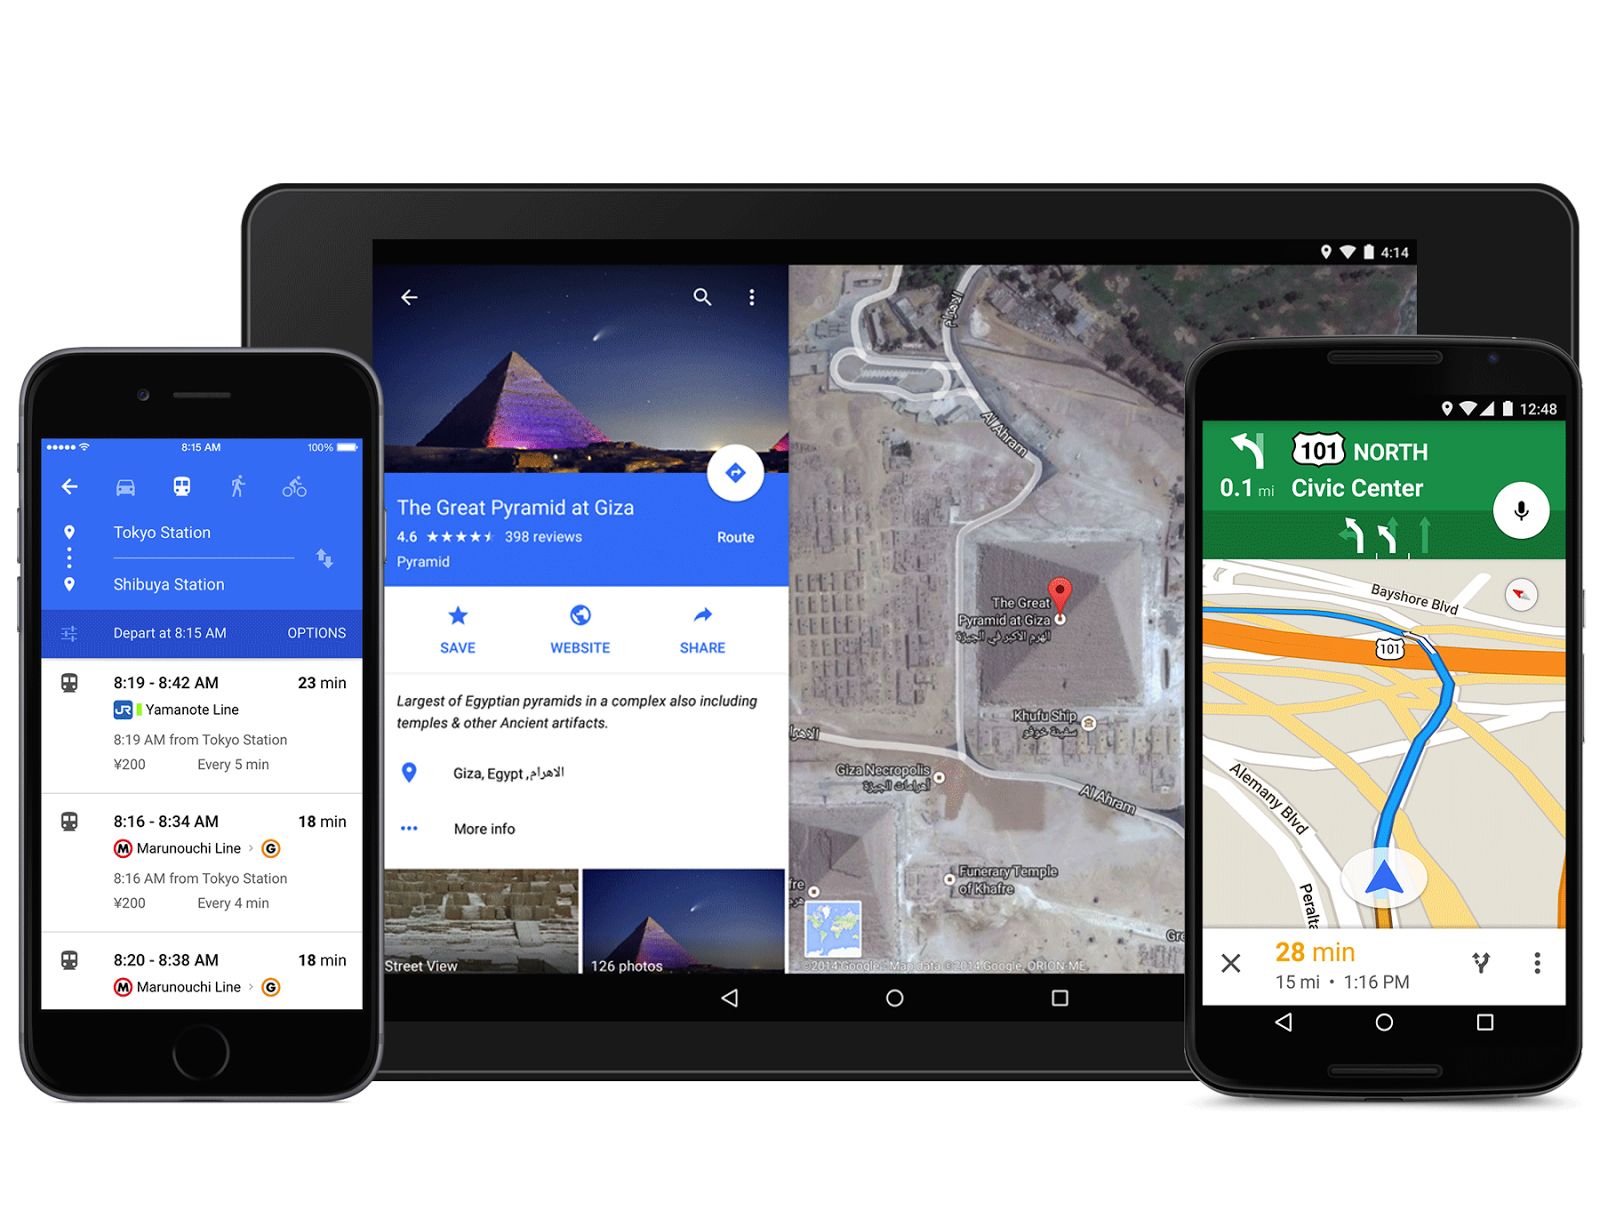 google maps for android and iphone has a new look and integration with opentable and uber image 1